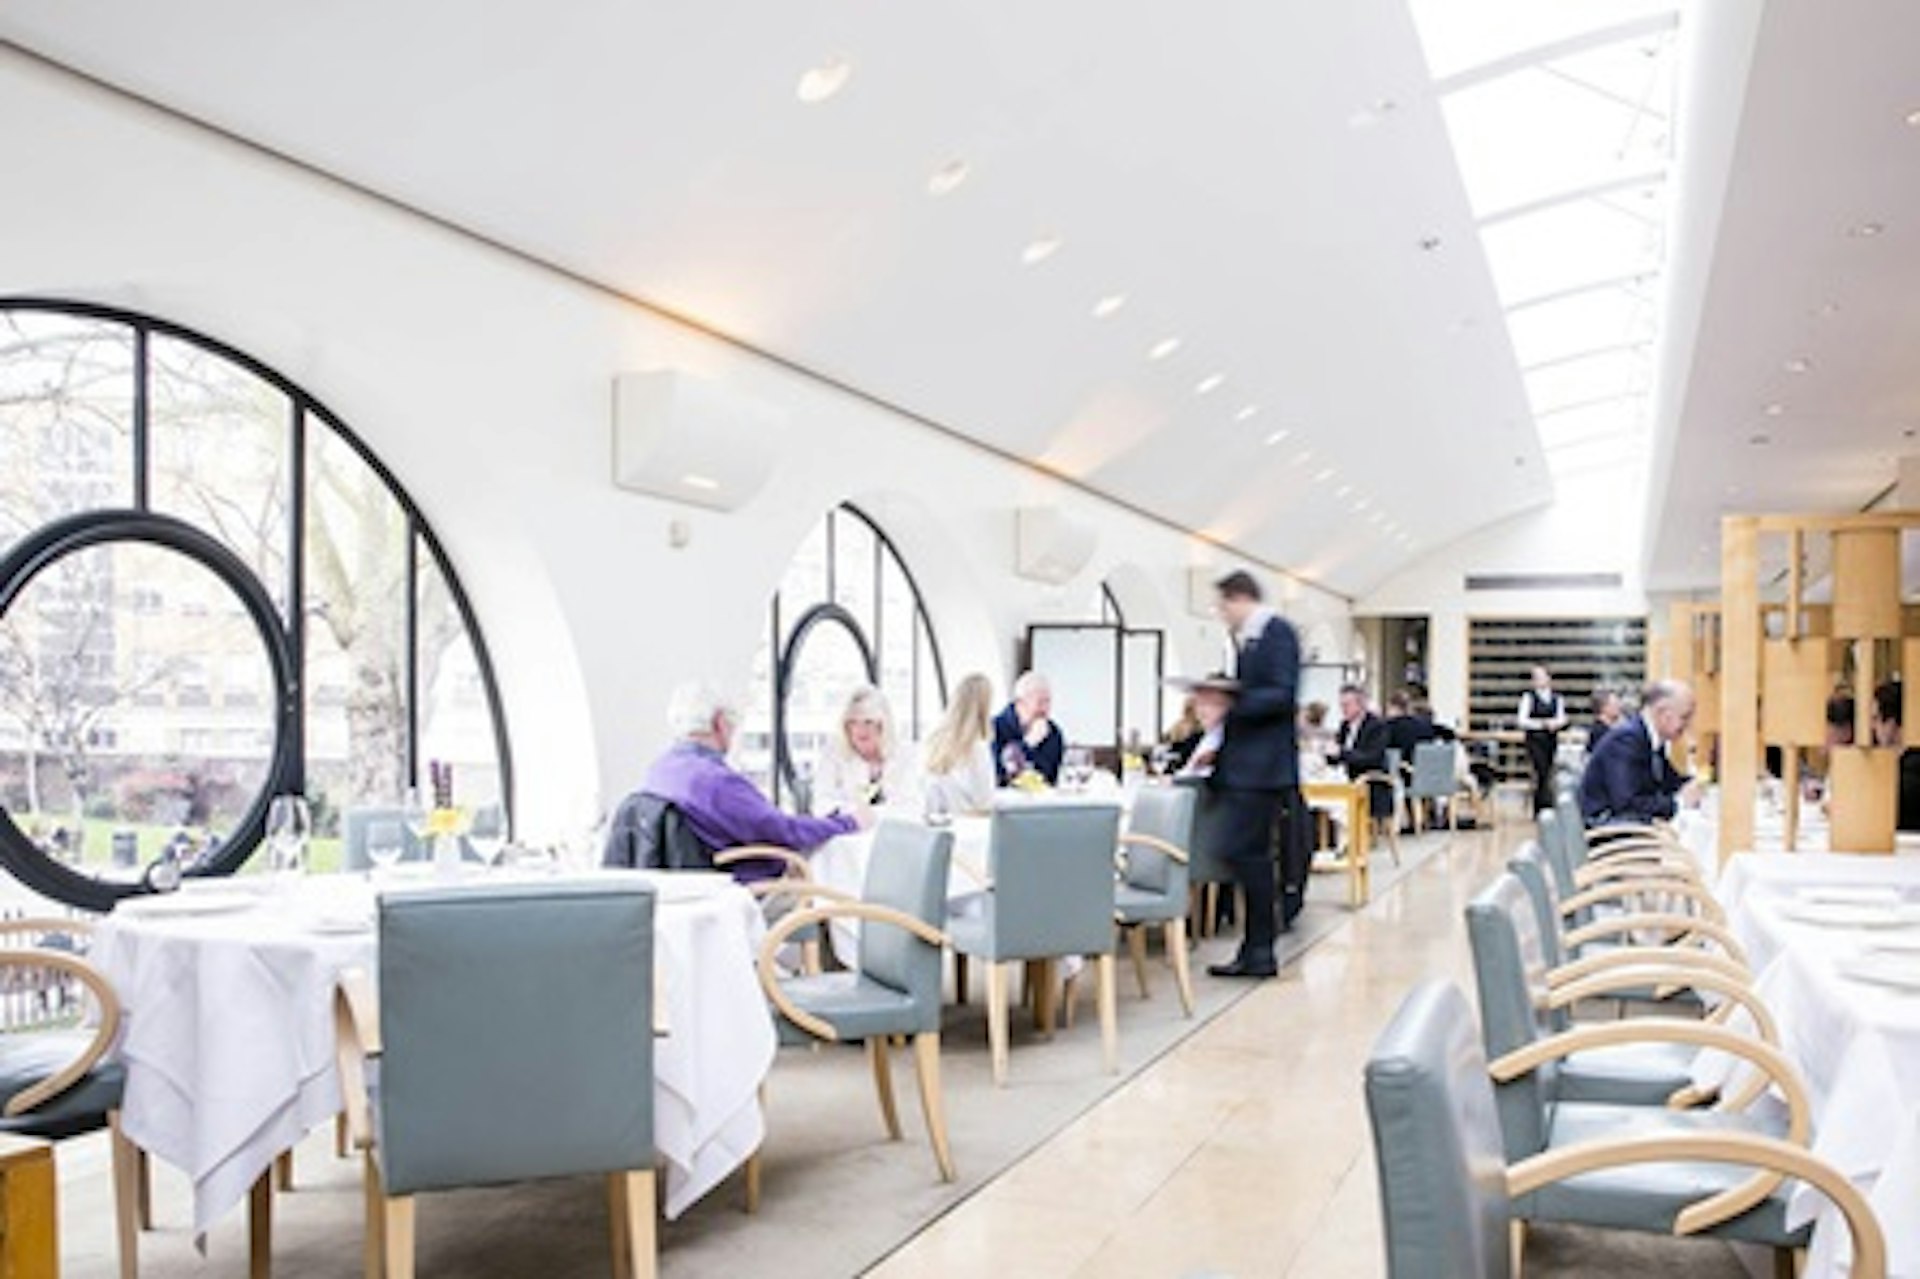 Elegant French Three Course Lunch with Bellini for Two at Orrery, Marylebone 4